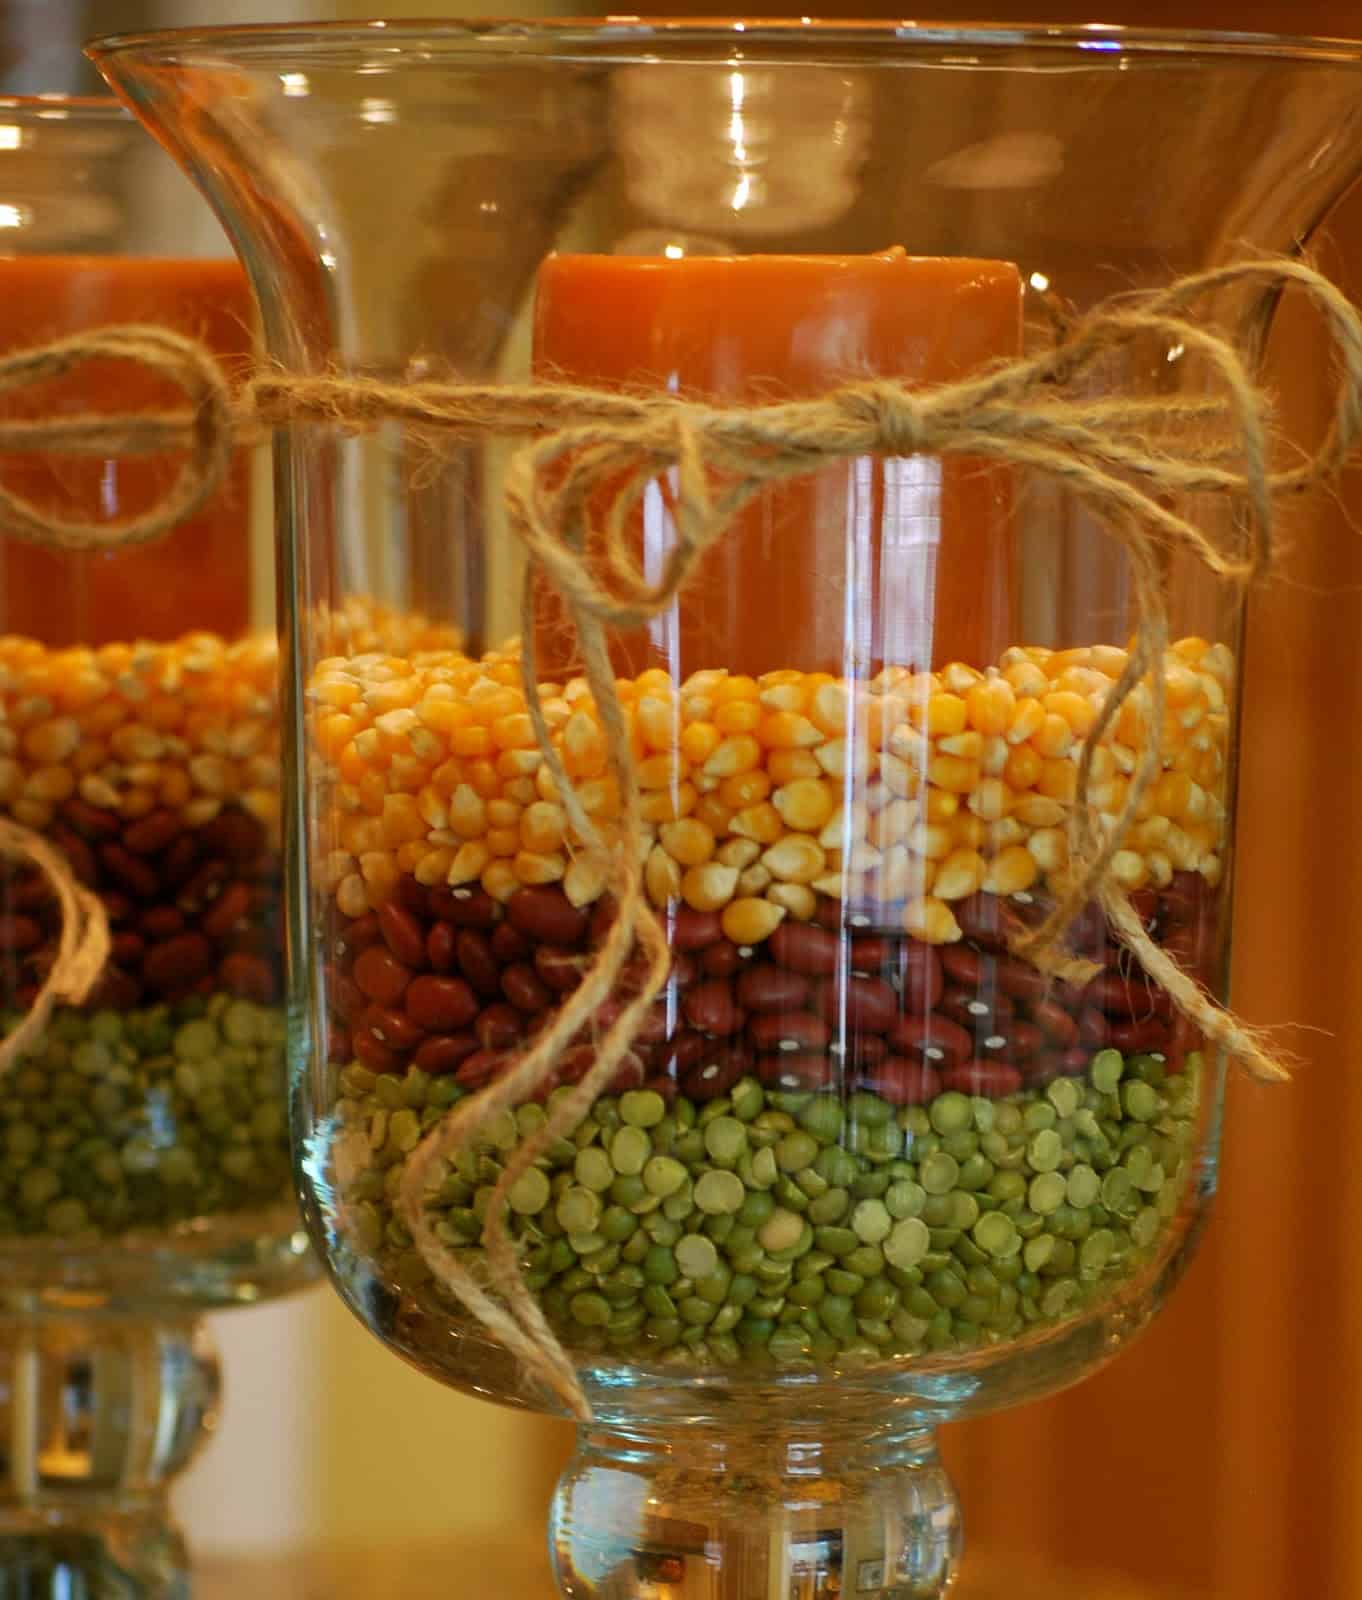 Lentil, bead, and corn filled candle vases